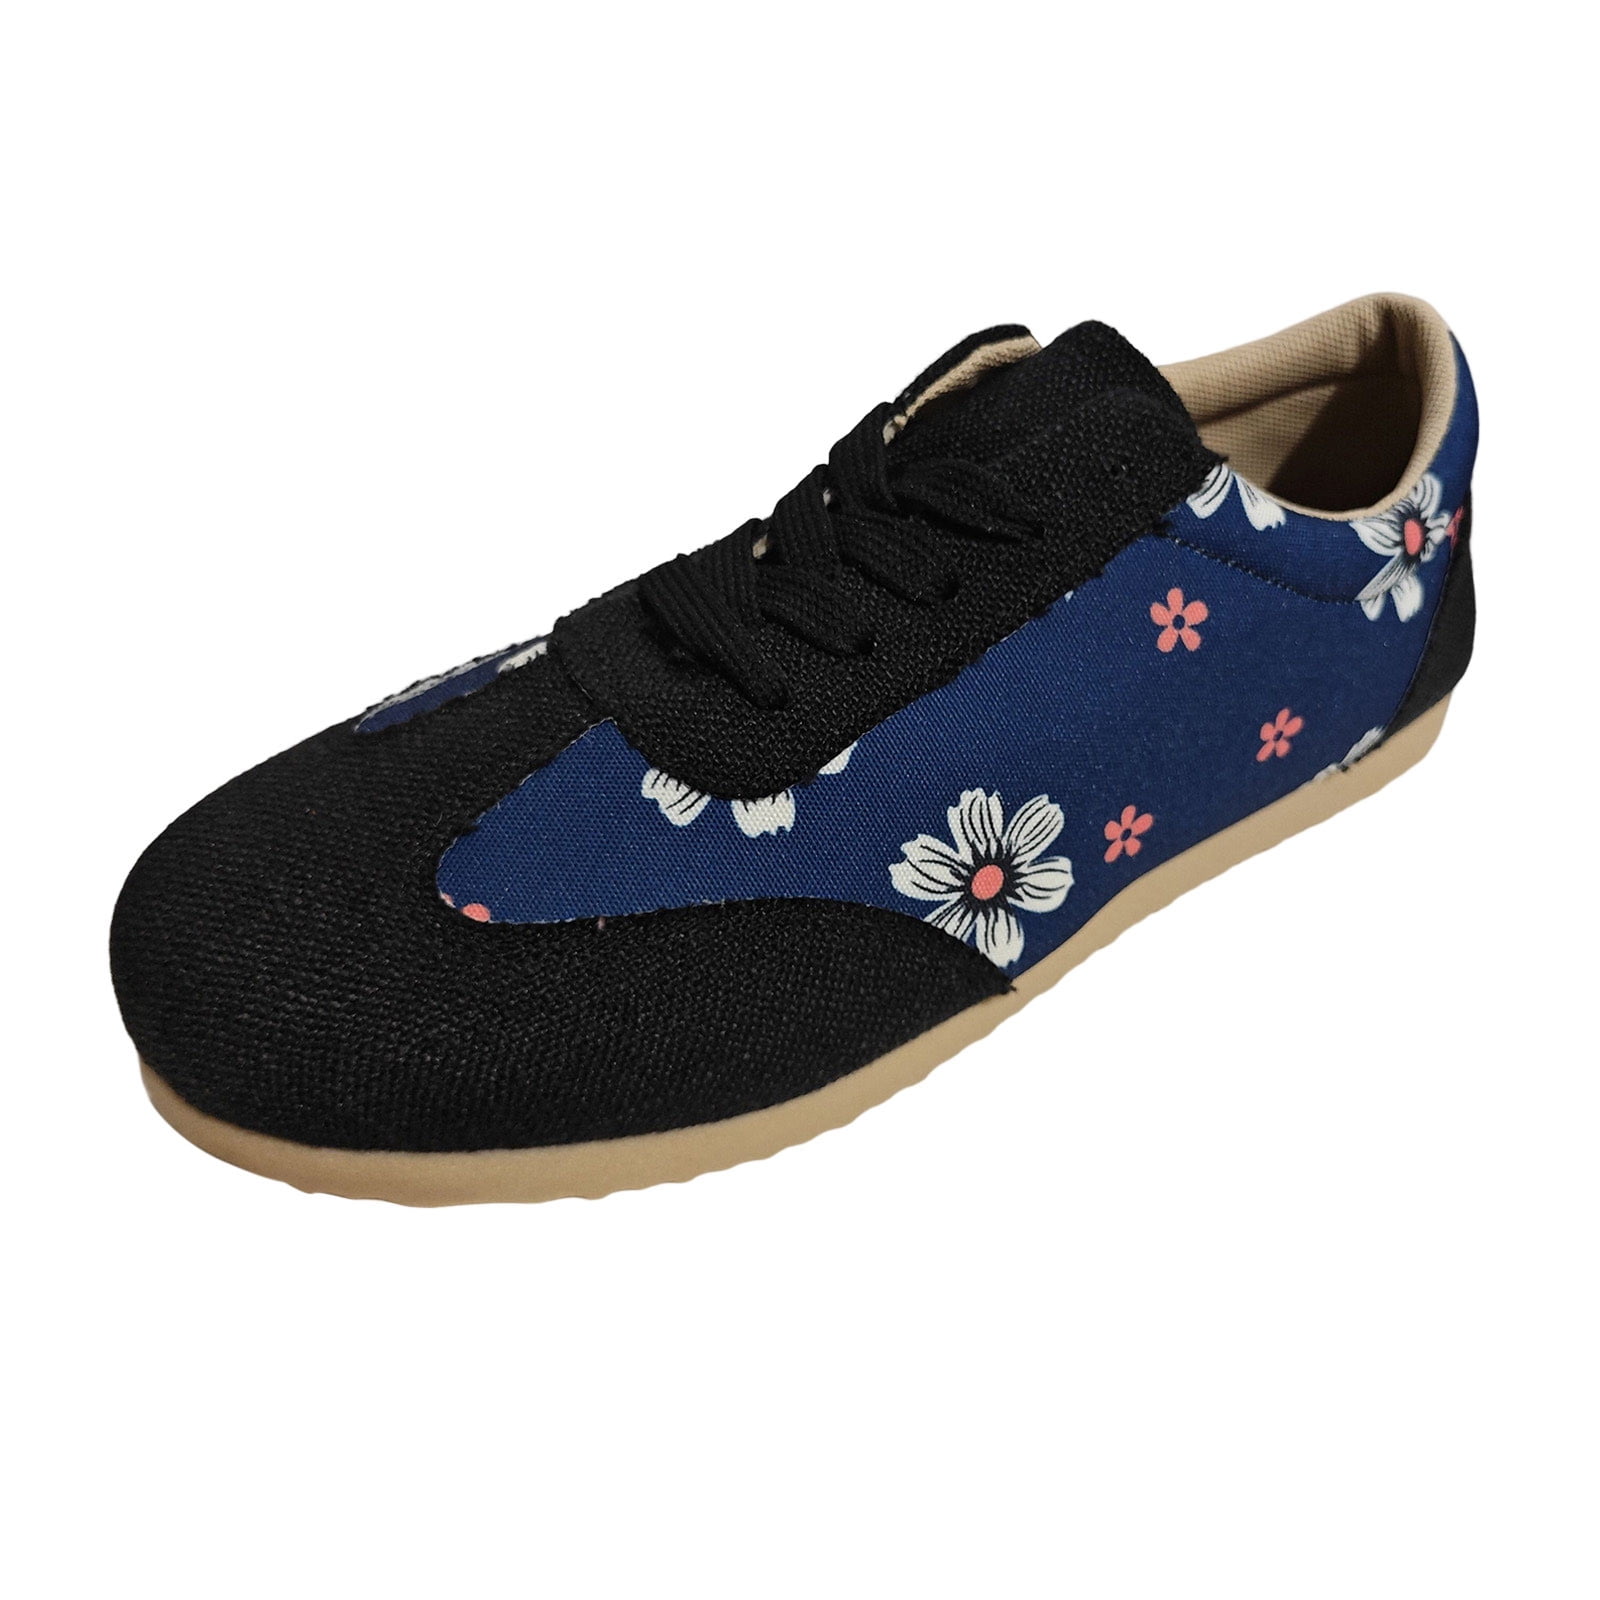 Women's Washable Slip-on Sneakers without Lace-up Fabric with Comfortable  Sole for Long-Wearing in -From Bosla Black-Black Color Size 37: Buy Online  at Best Price in Egypt - Souq is now Amazon.eg